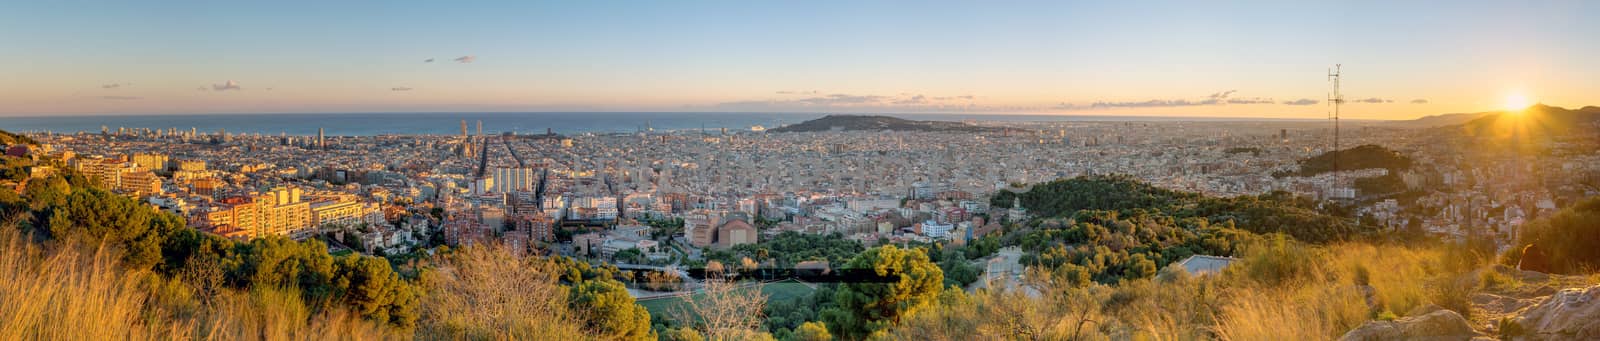 Panorama of Barcelona at sunset by elxeneize